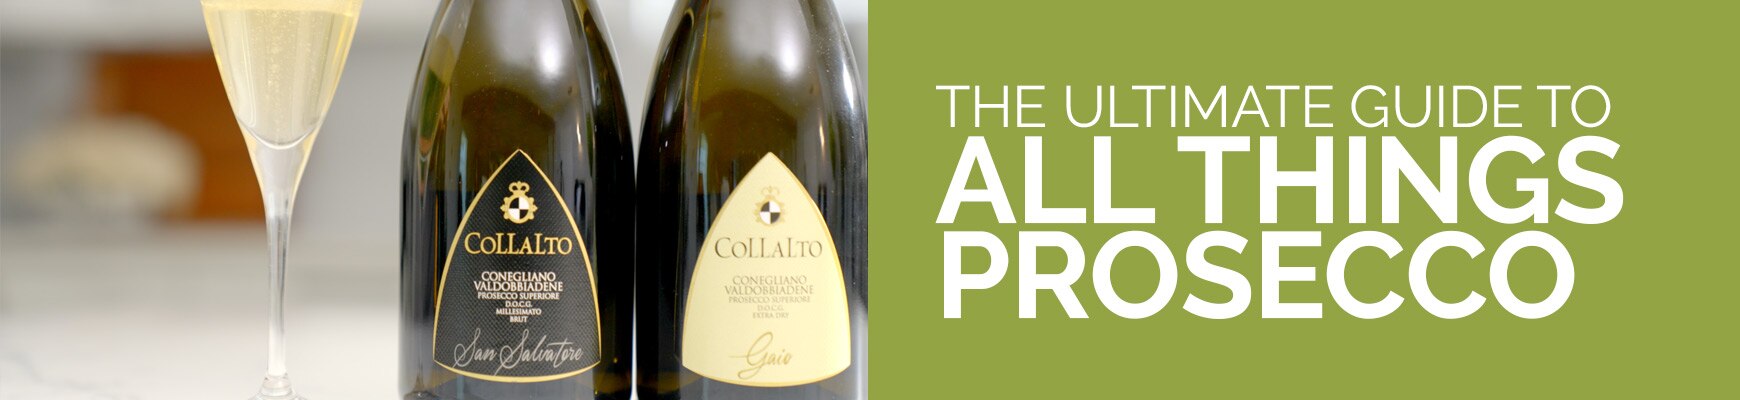 The Ultimate Guide to All Things Prosecco